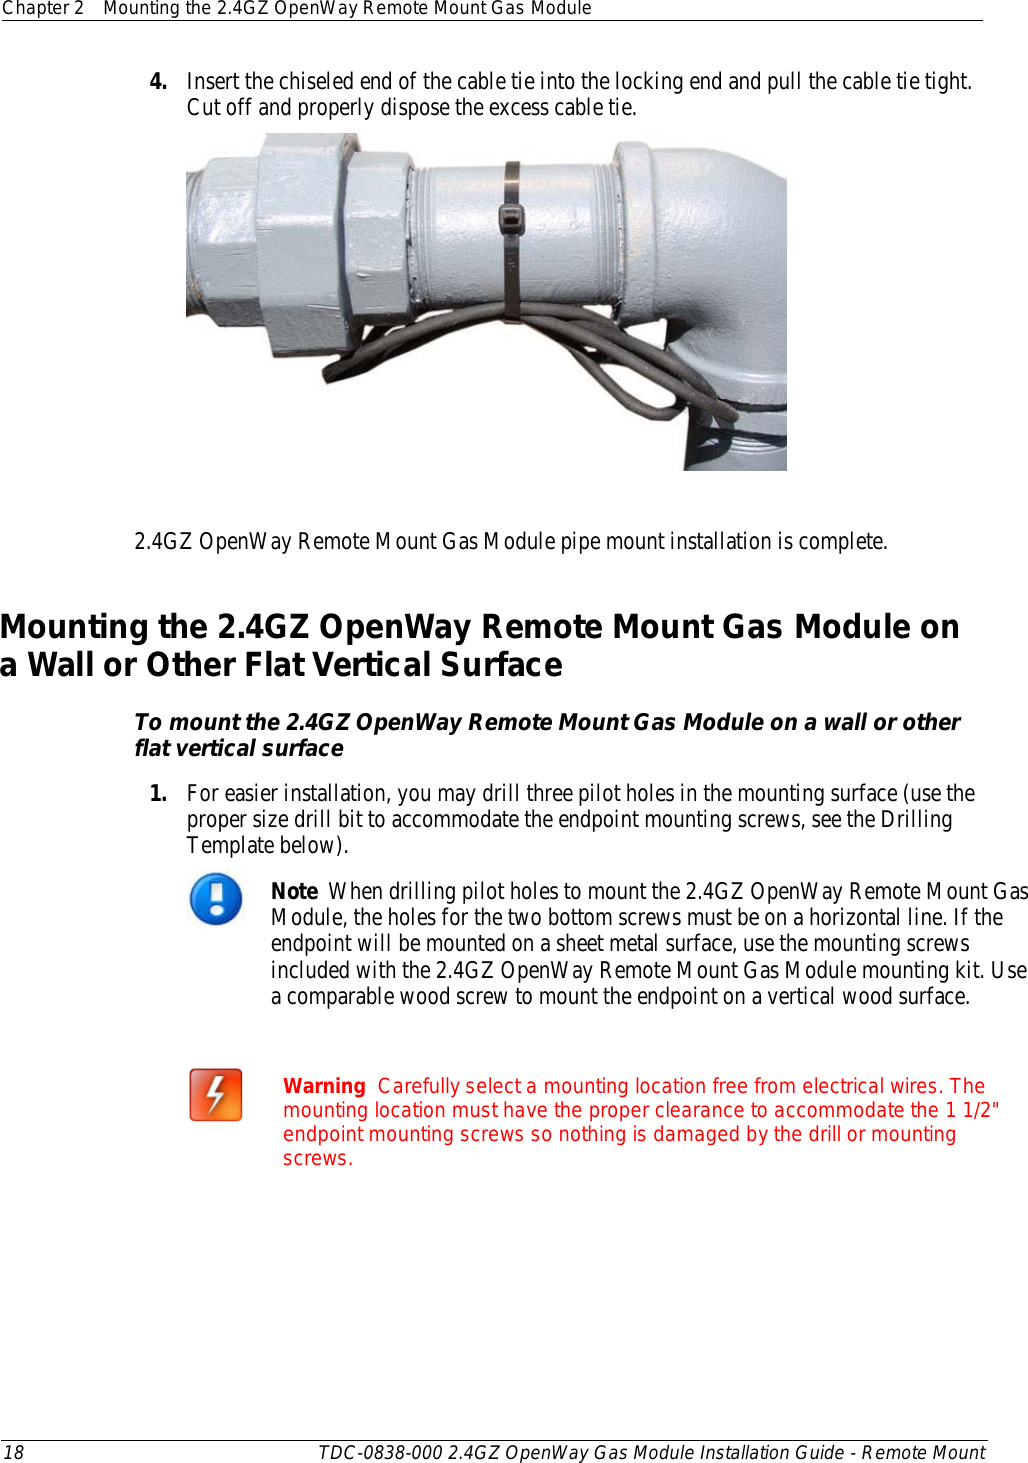 Chapter 2 Mounting the 2.4GZ OpenWay Remote Mount Gas Module  18 TDC-0838-000 2.4GZ OpenWay Gas Module Installation Guide - Remote Mount  4. Insert the chiseled end of the cable tie into the locking end and pull the cable tie tight. Cut off and properly dispose the excess cable tie.    2.4GZ OpenWay Remote Mount Gas Module pipe mount installation is complete.  Mounting the 2.4GZ OpenWay Remote Mount Gas Module on a Wall or Other Flat Vertical Surface To mount the 2.4GZ OpenWay Remote Mount Gas Module on a wall or other flat vertical surface 1. For easier installation, you may drill three pilot holes in the mounting surface (use the proper size drill bit to accommodate the endpoint mounting screws, see the Drilling Template below).   Note  When drilling pilot holes to mount the 2.4GZ OpenWay Remote Mount Gas Module, the holes for the two bottom screws must be on a horizontal line. If the endpoint will be mounted on a sheet metal surface, use the mounting screws included with the 2.4GZ OpenWay Remote Mount Gas Module mounting kit. Use a comparable wood screw to mount the endpoint on a vertical wood surface.   Warning  Carefully select a mounting location free from electrical wires. The mounting location must have the proper clearance to accommodate the 1 1/2&quot; endpoint mounting screws so nothing is damaged by the drill or mounting screws.  